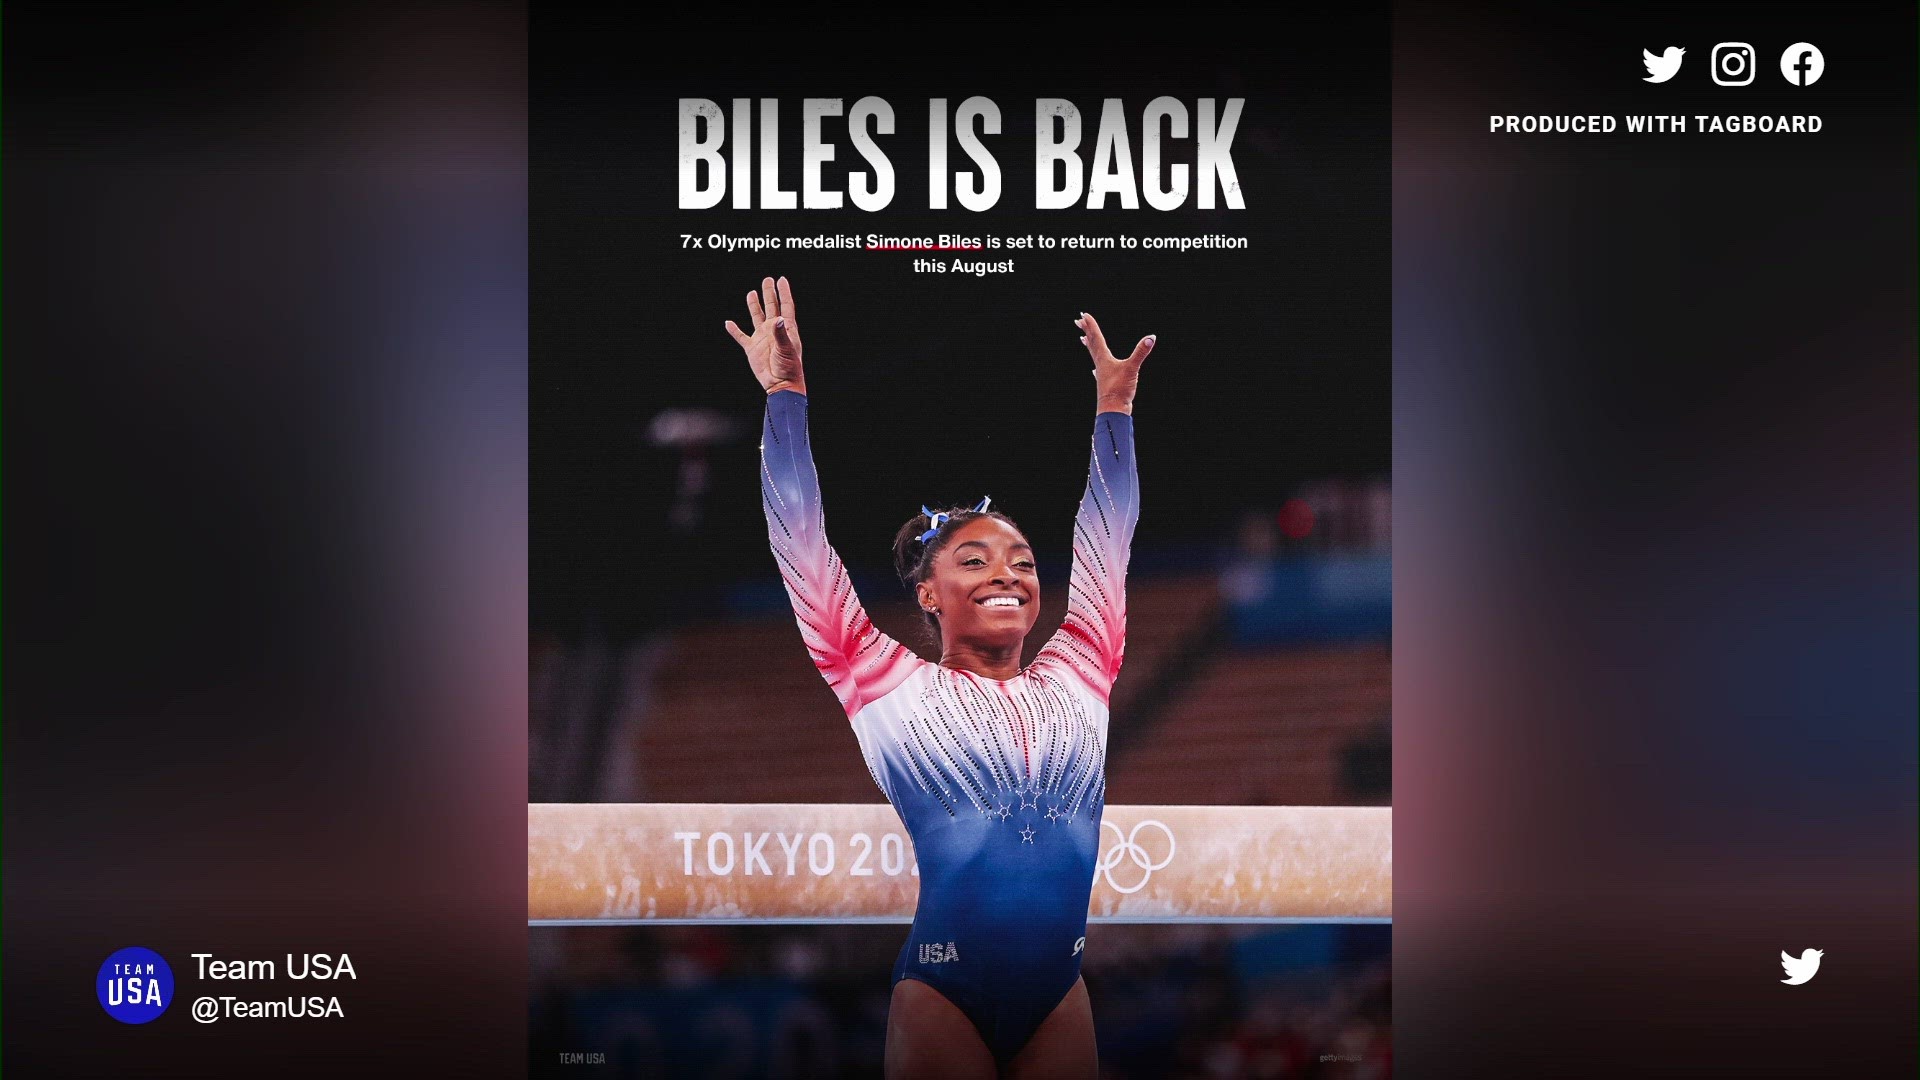 Biles has taken most of the last two years off after making headlines at the Tokyo Olympics when she removed herself from several events to focus on mental health.